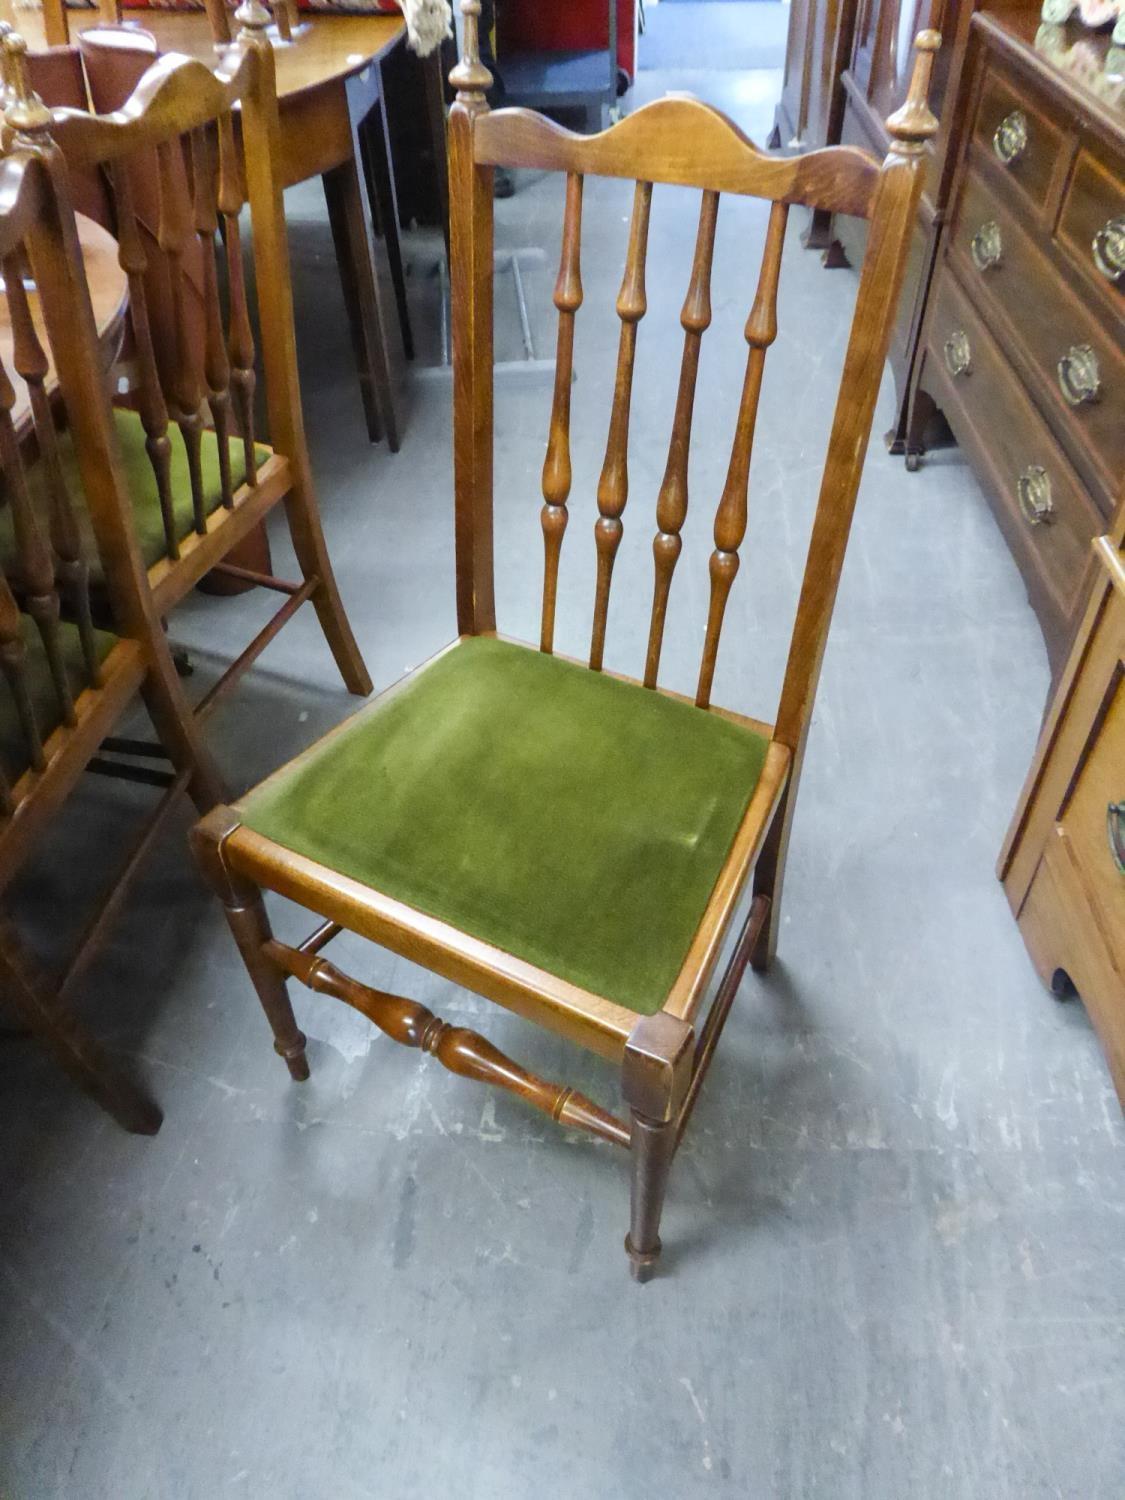 SET OF 10 HARDWOOD SINGLE CHAIRS EACH WITH TALL FIVE SPINDLE BACKS. DROP IN SEATS IN MOSS GREEN